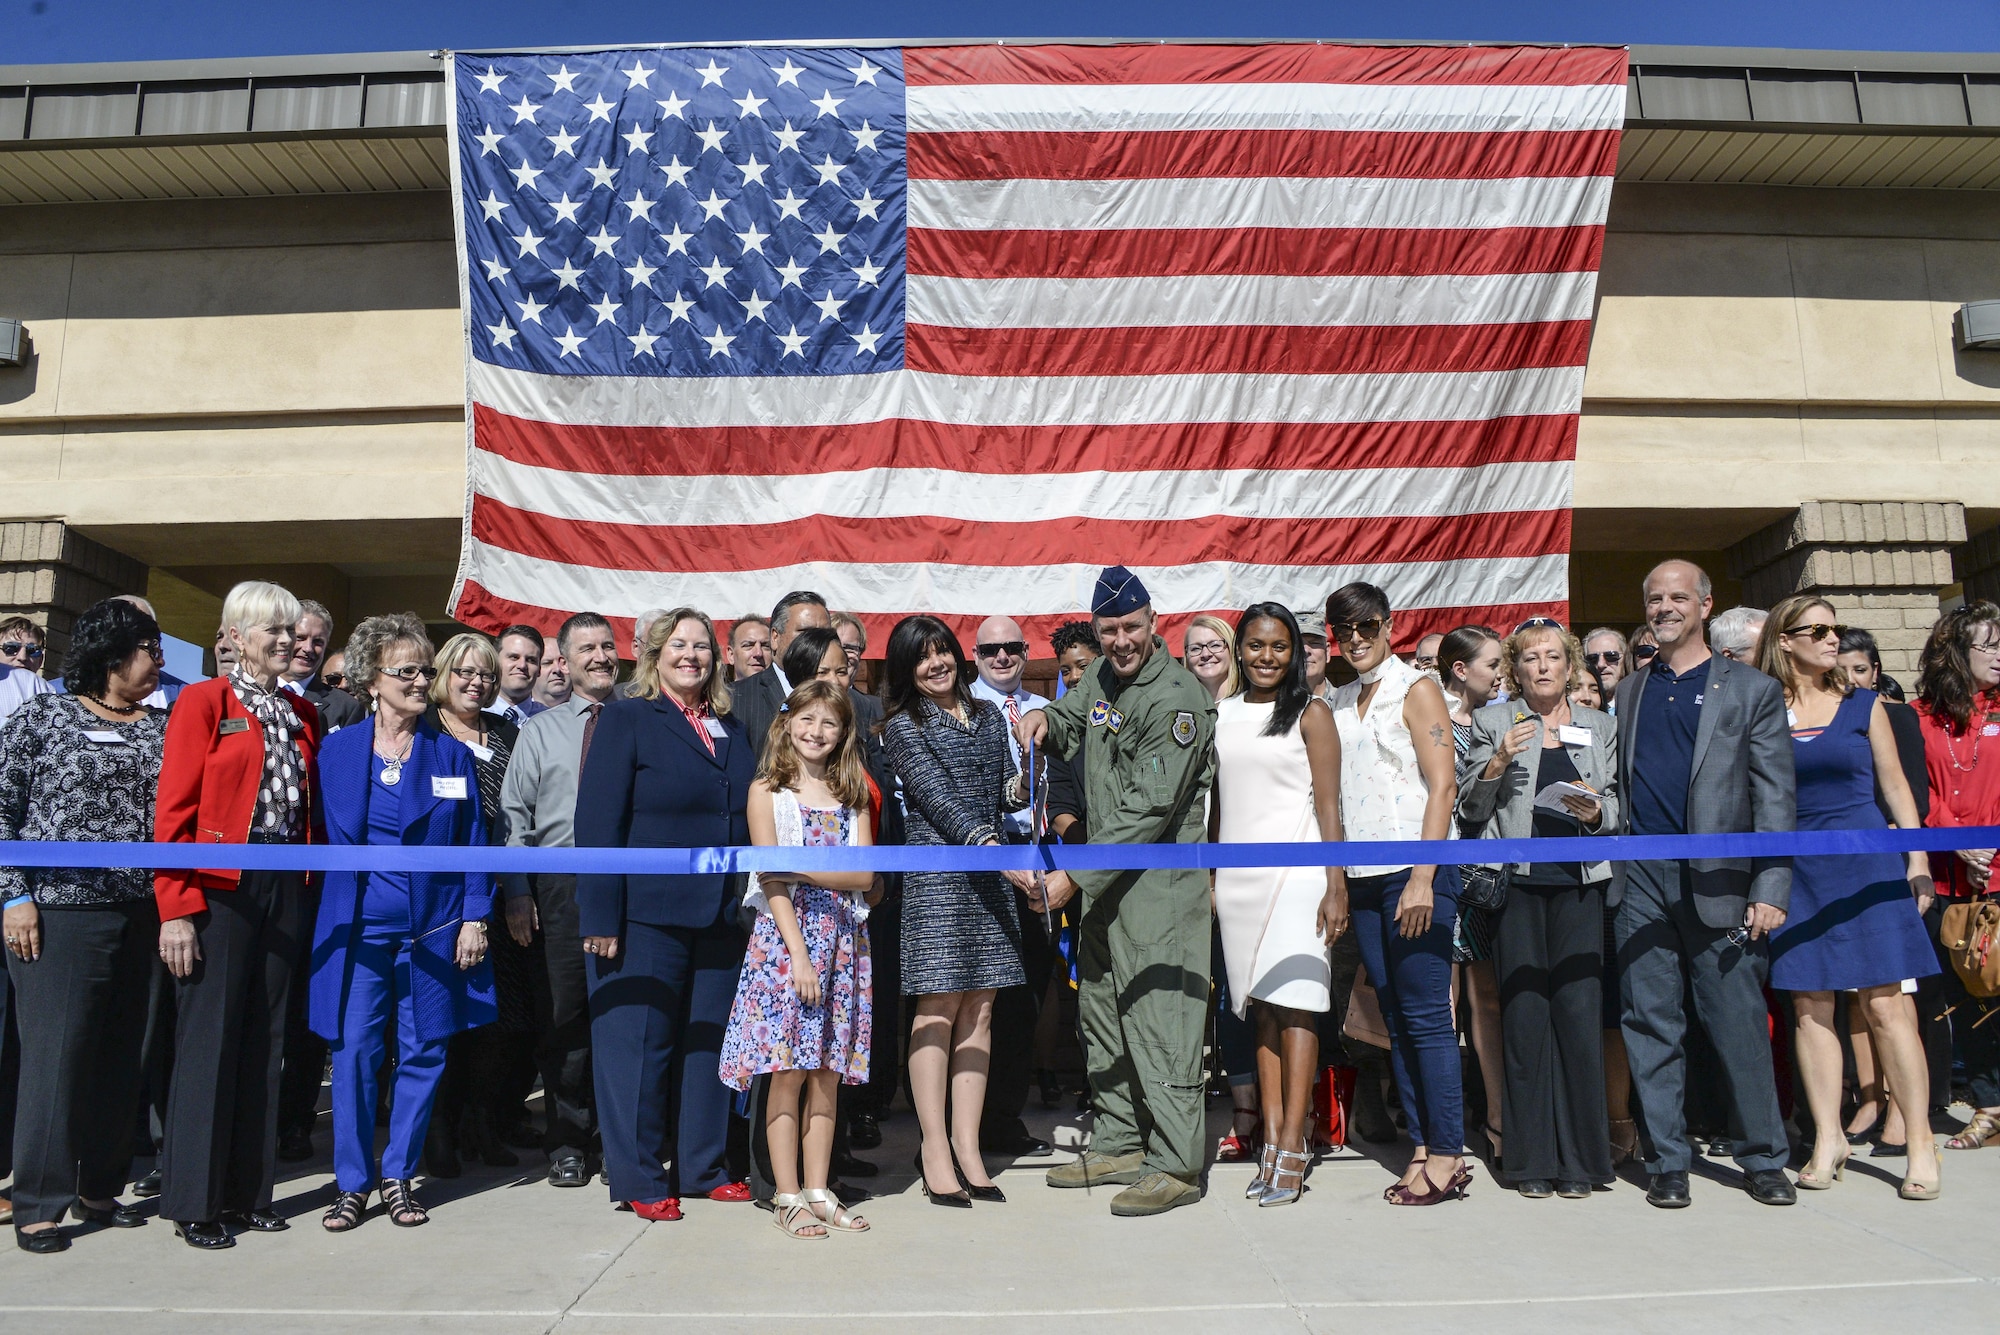 Brig. Gen. Brook Leonard, 56th Fighter Wing commander, and west valley community members cut the ribbon signifying the grand opening of the Military and Veteran Success Center at Luke Air Force Base, Ariz., Nov. 9, 2017. The MVSC is a community supported, case-managed, holistic support center for transitioning service members, veterans, and their dependents. (U.S. Air Force photo/Airman 1st Class Caleb Worpel)